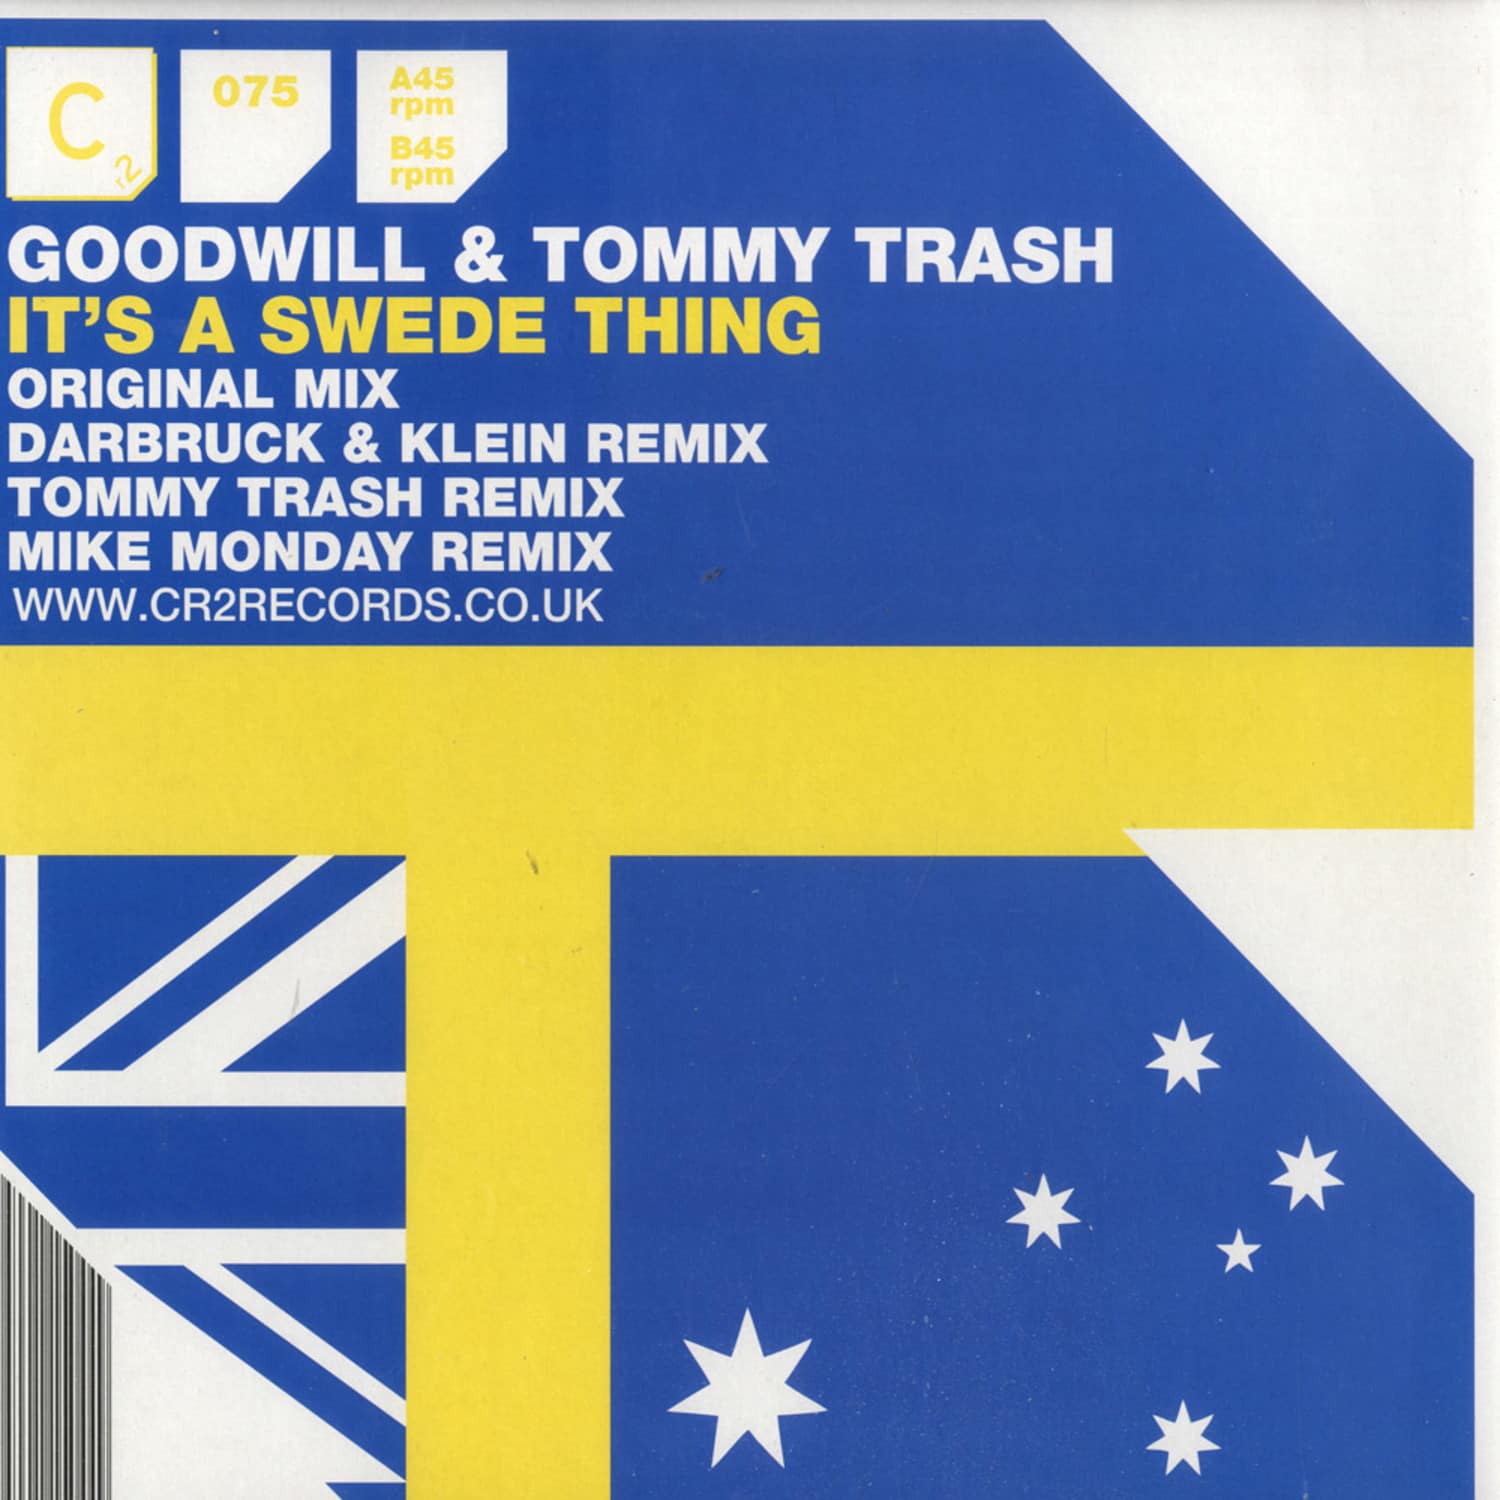 Goodwill & Tommy Trash - IT S A SWEDE THING